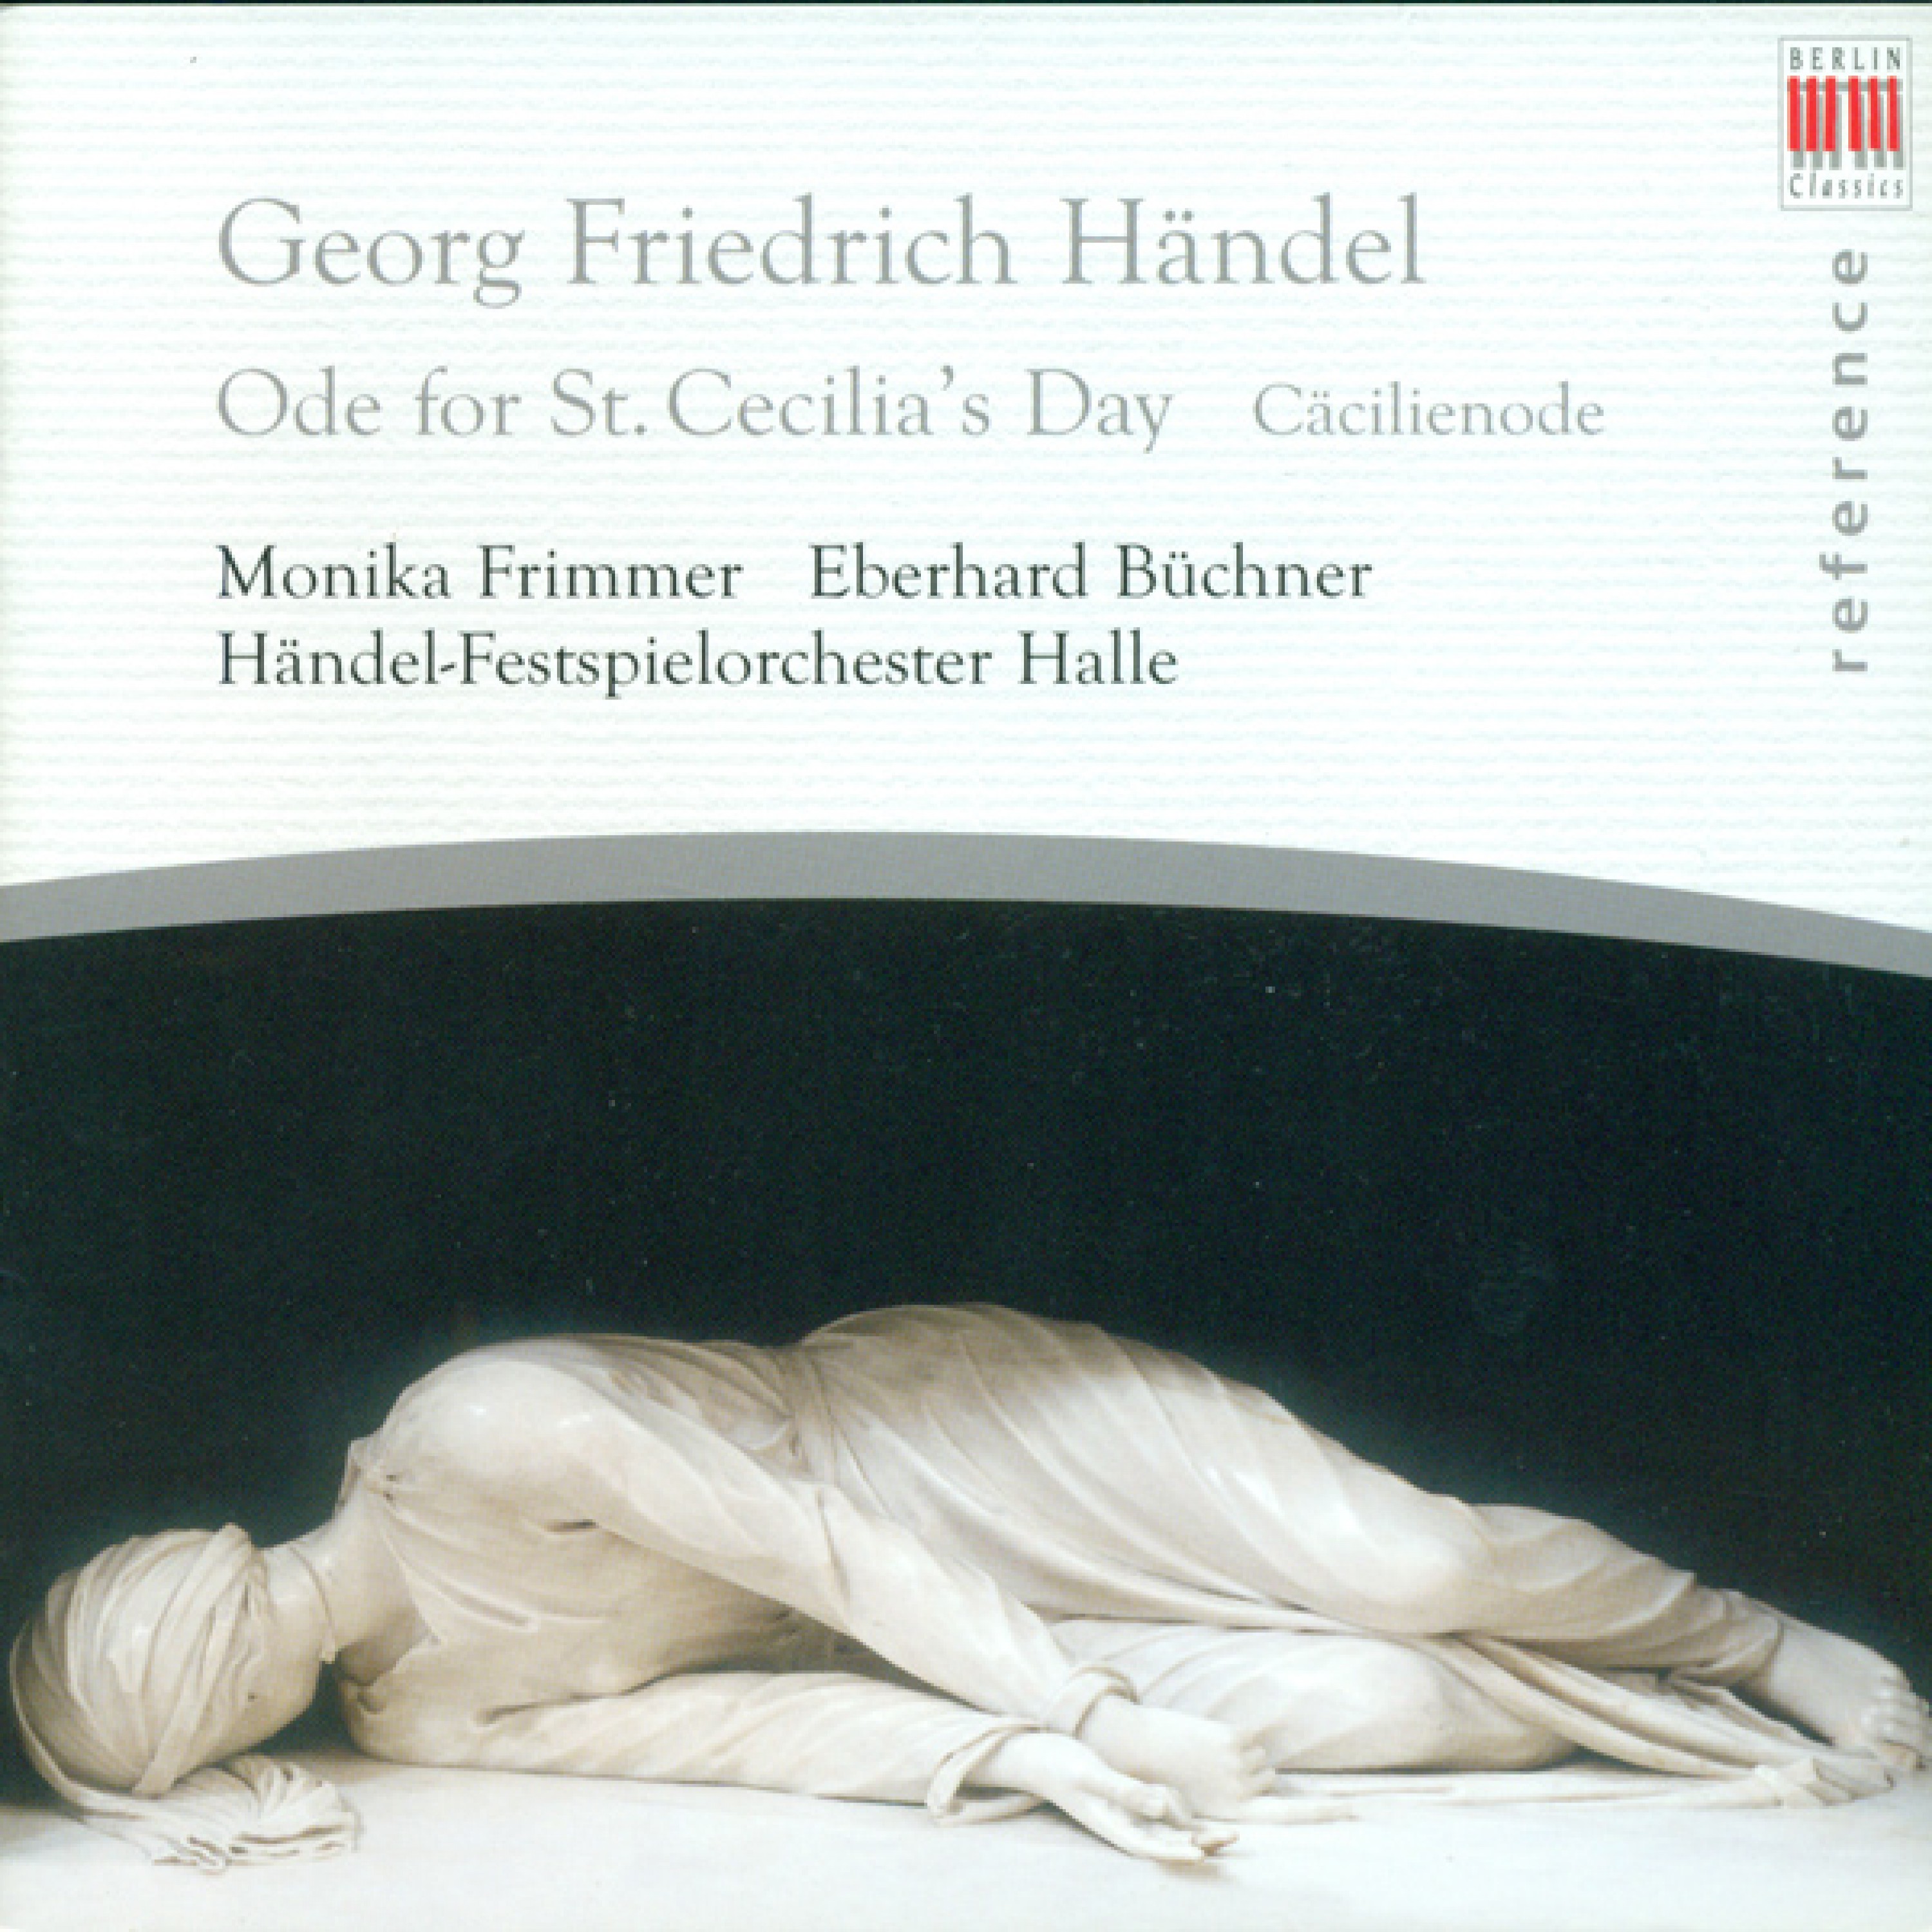 Ode for St. Cecilia's Day, HWV 76: Accompagnato "From Harmony"